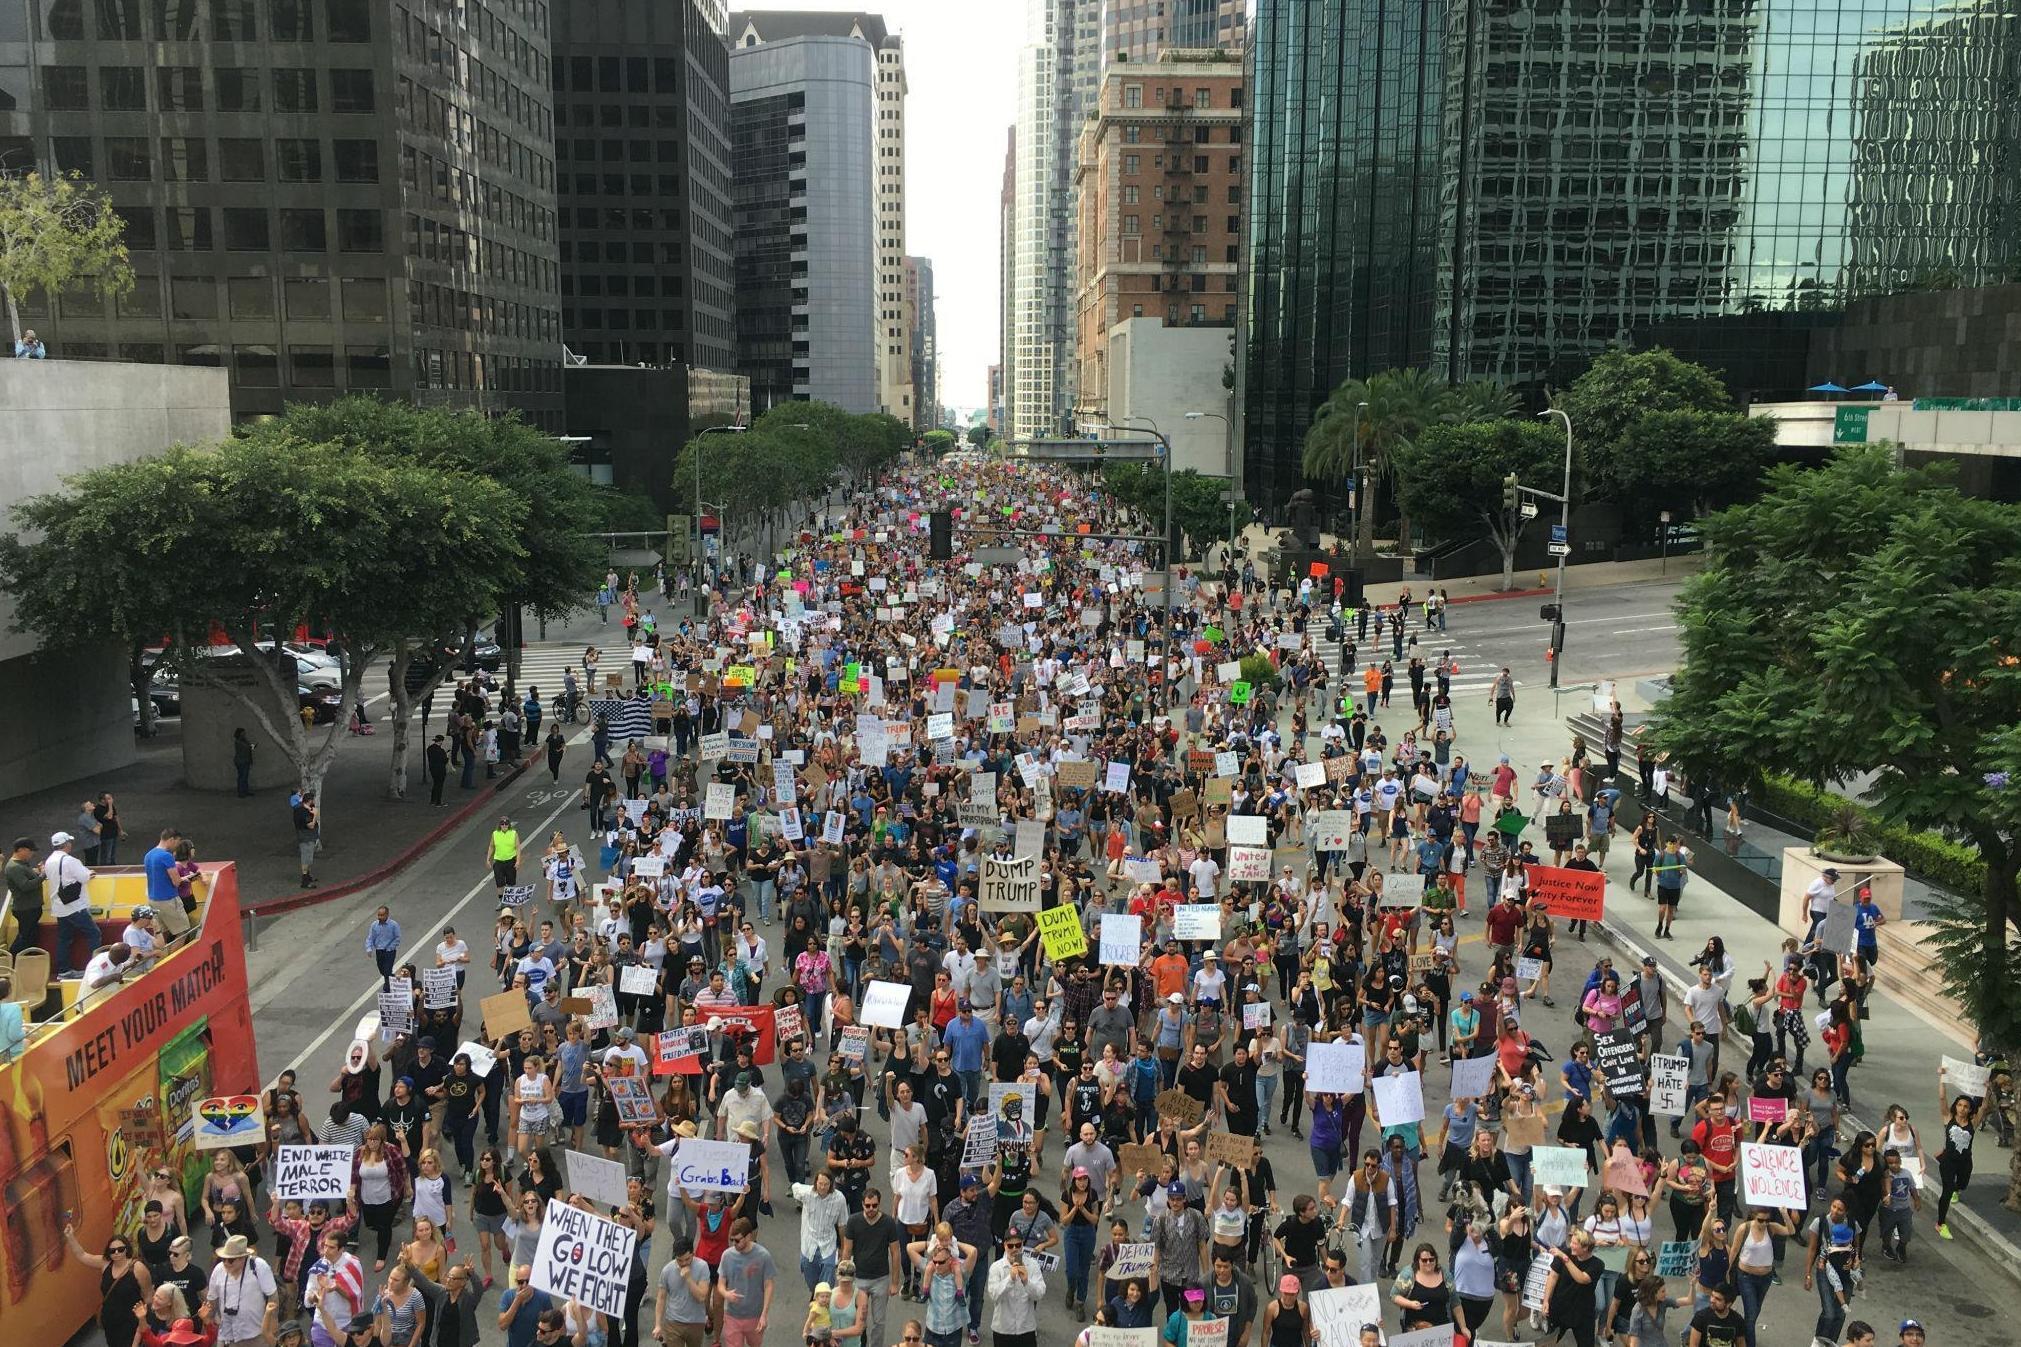 Police estimated at least 8,000 people marched in opposition to Donald Trump in Los Angeles on Saturday